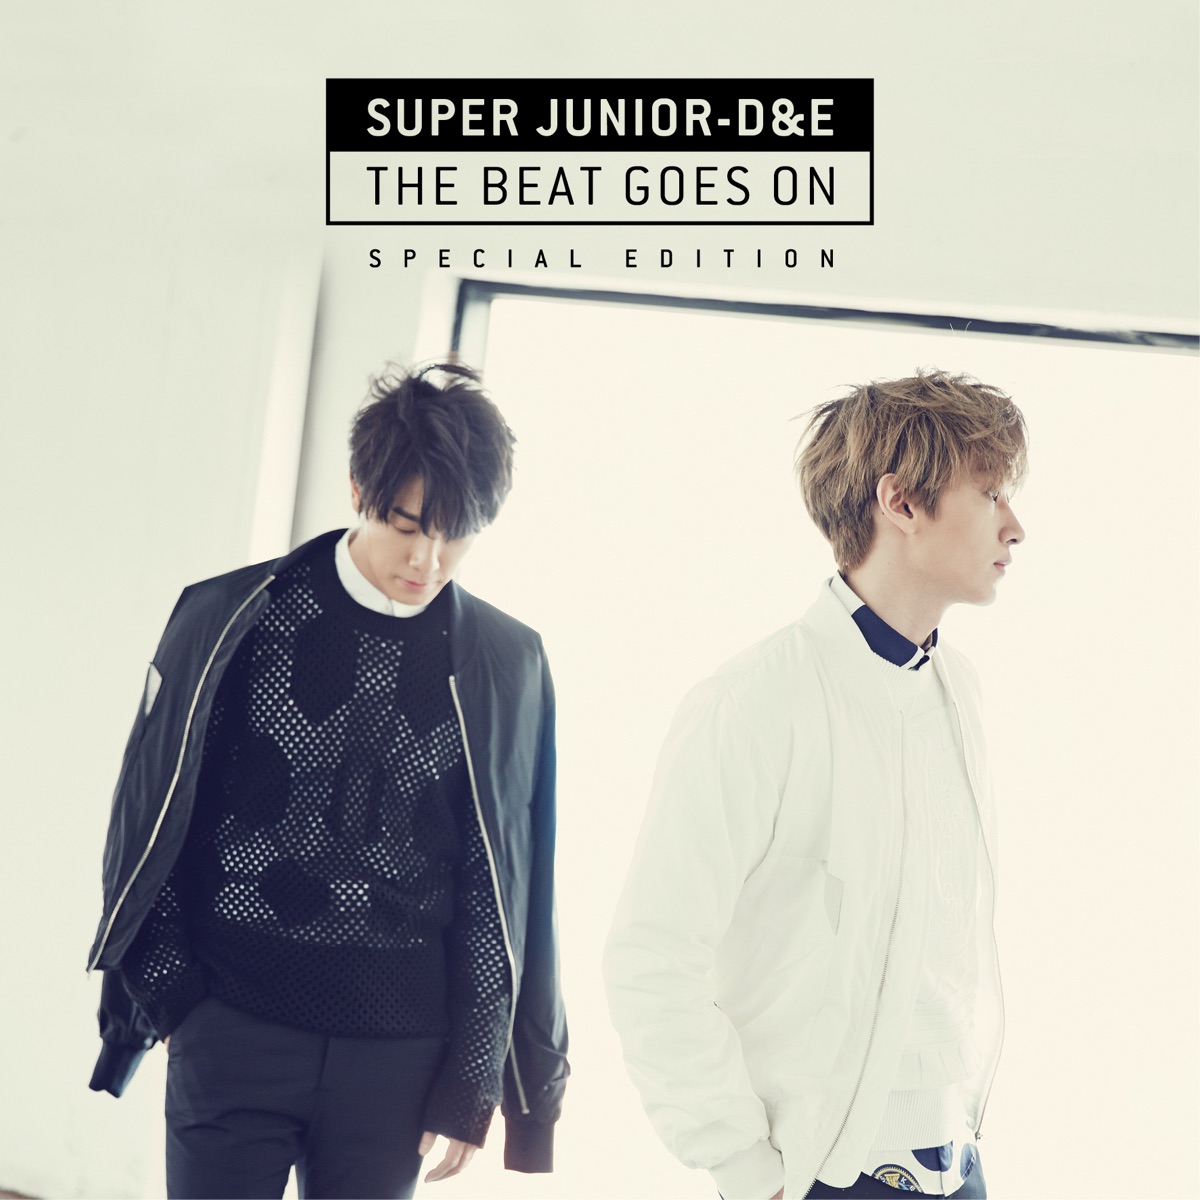 SUPER JUNIOR-D&E – The Beat Goes On’ Special Edition